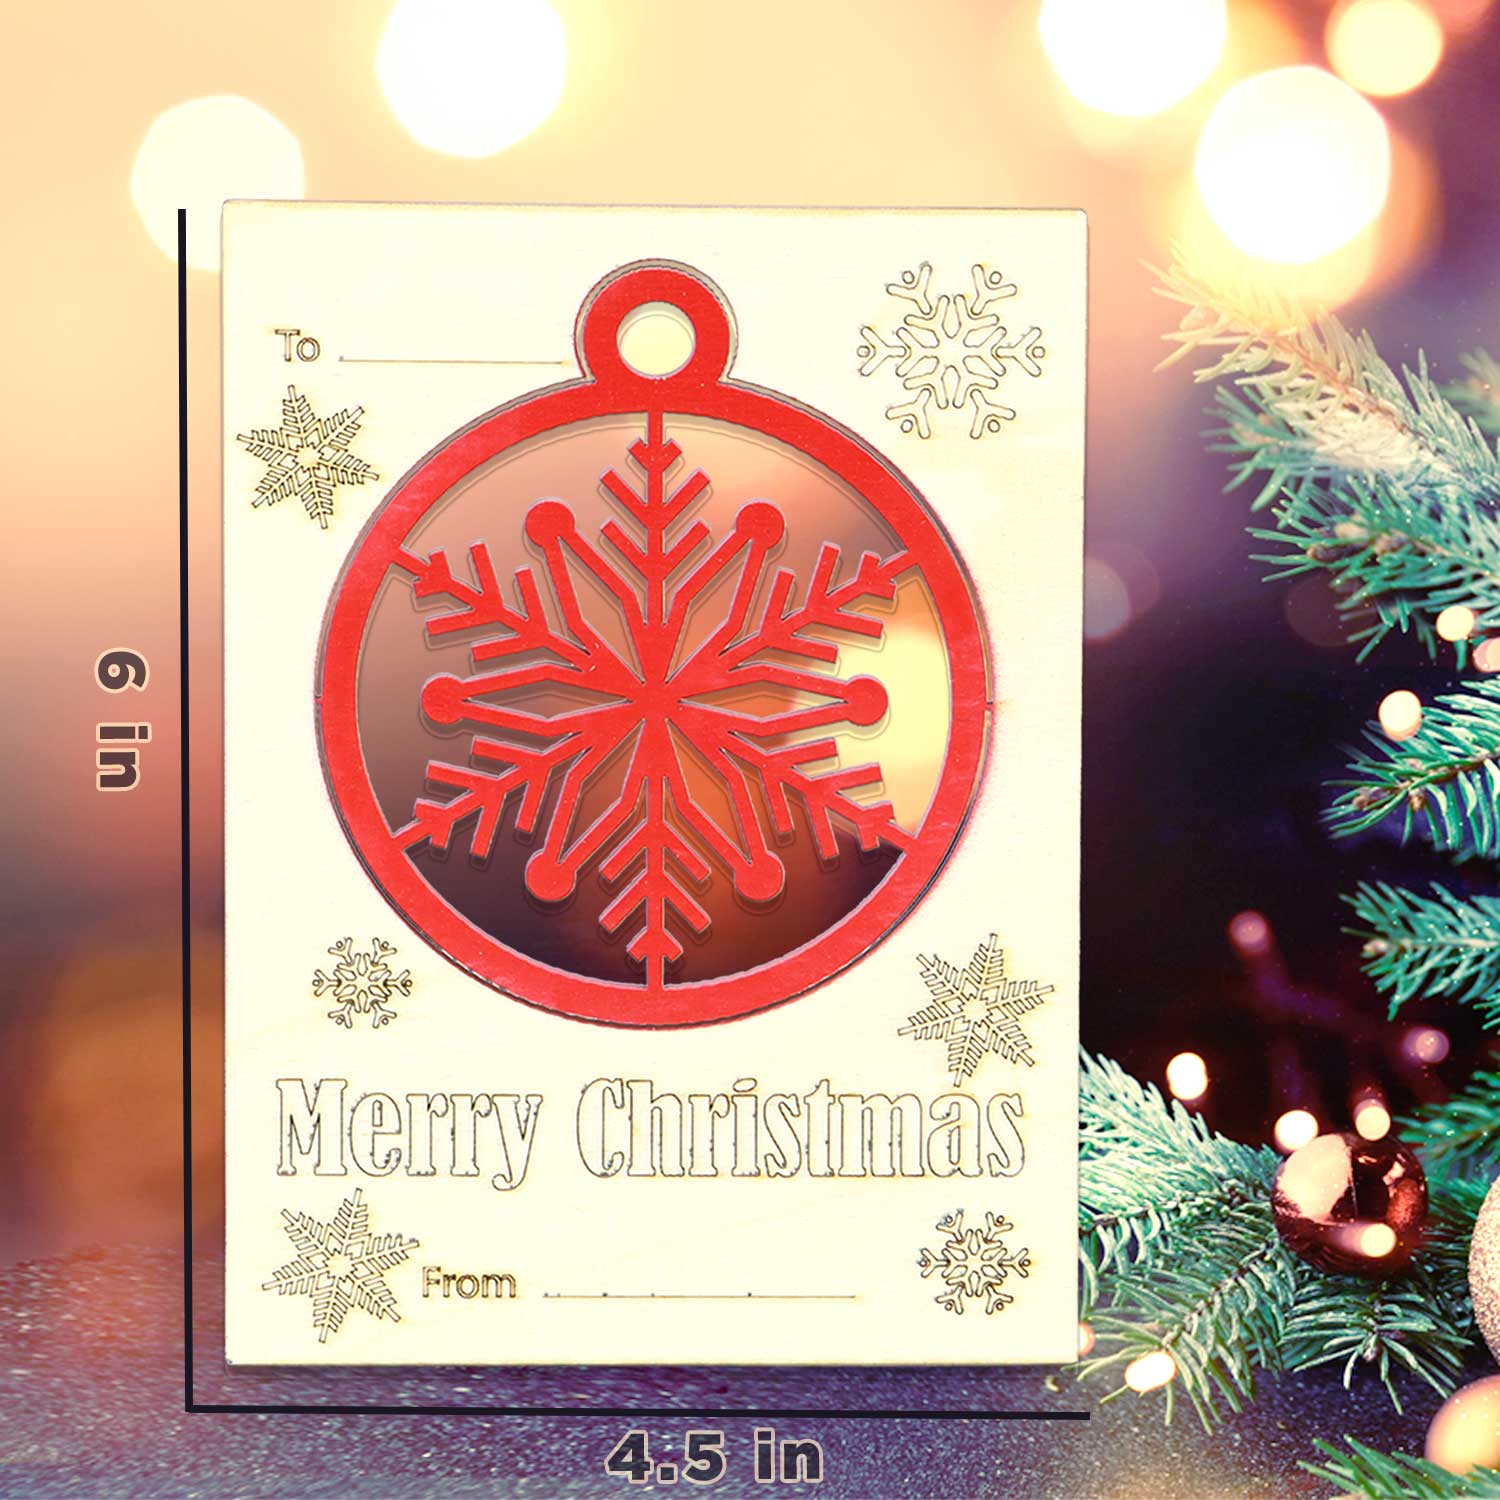 Wooden Christmas Card 4,5 x 6 inches with Push -Out Ornament Envelope Included